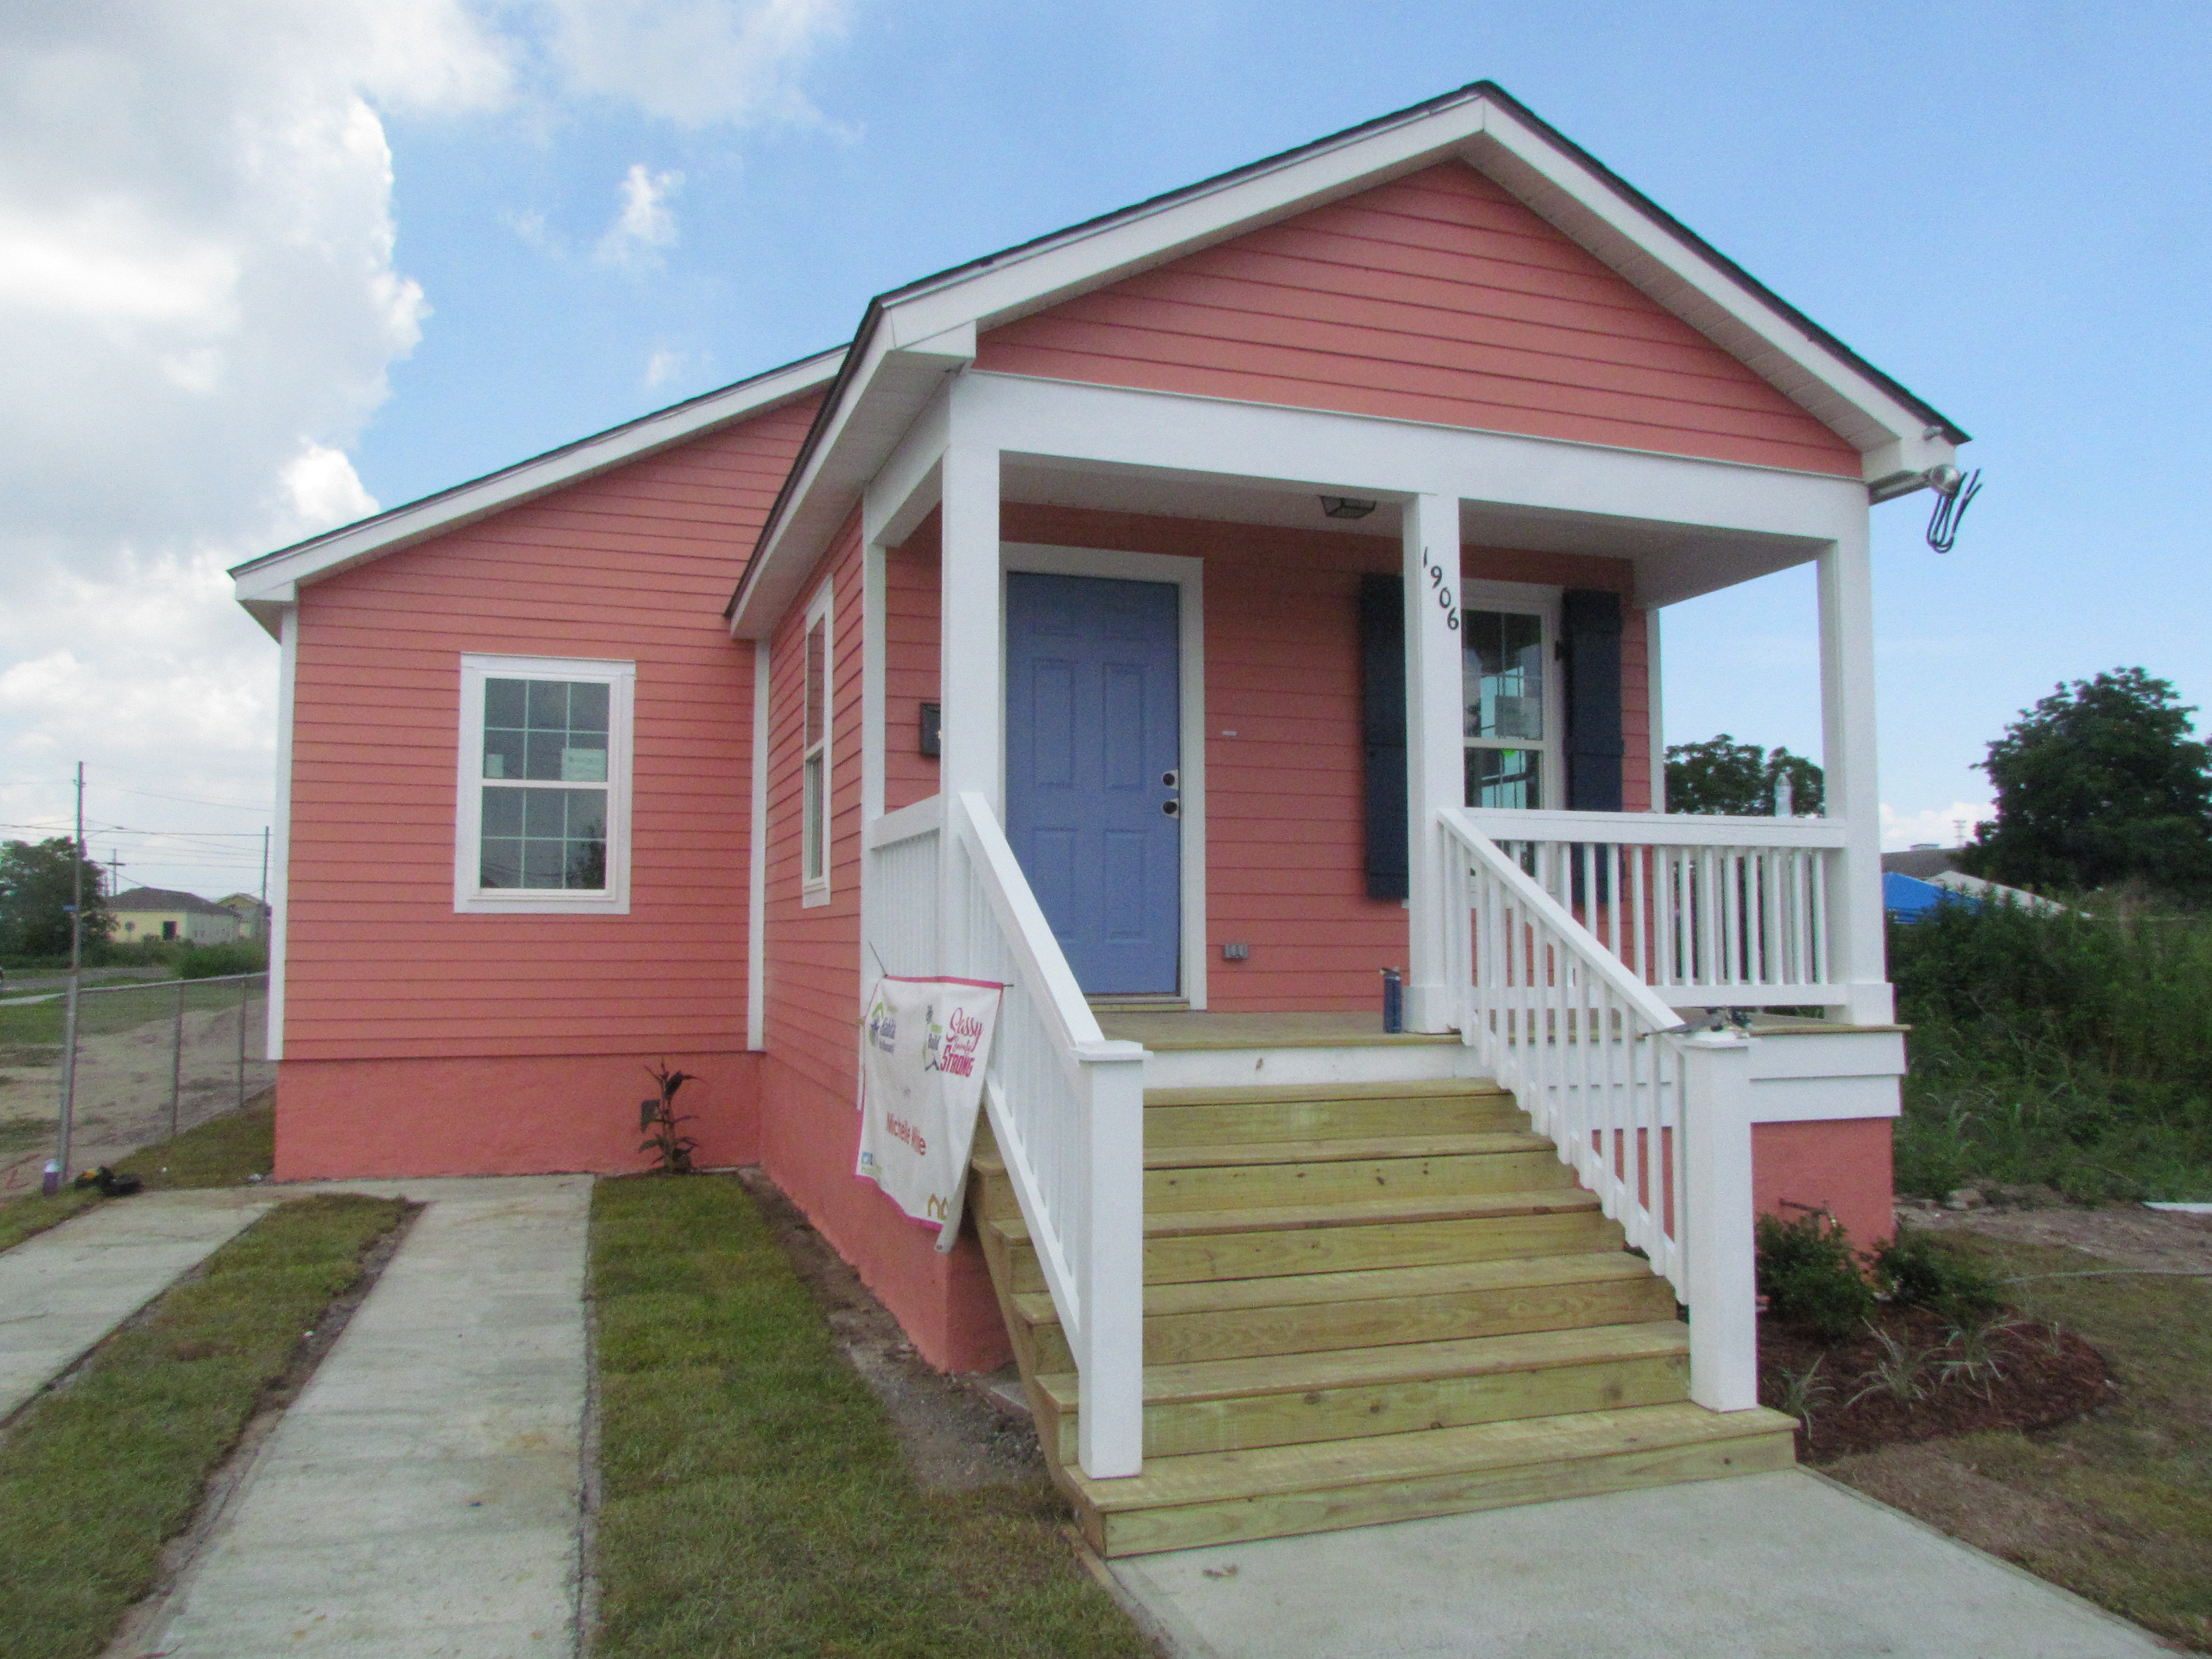 Pink Habitat house with short porch.